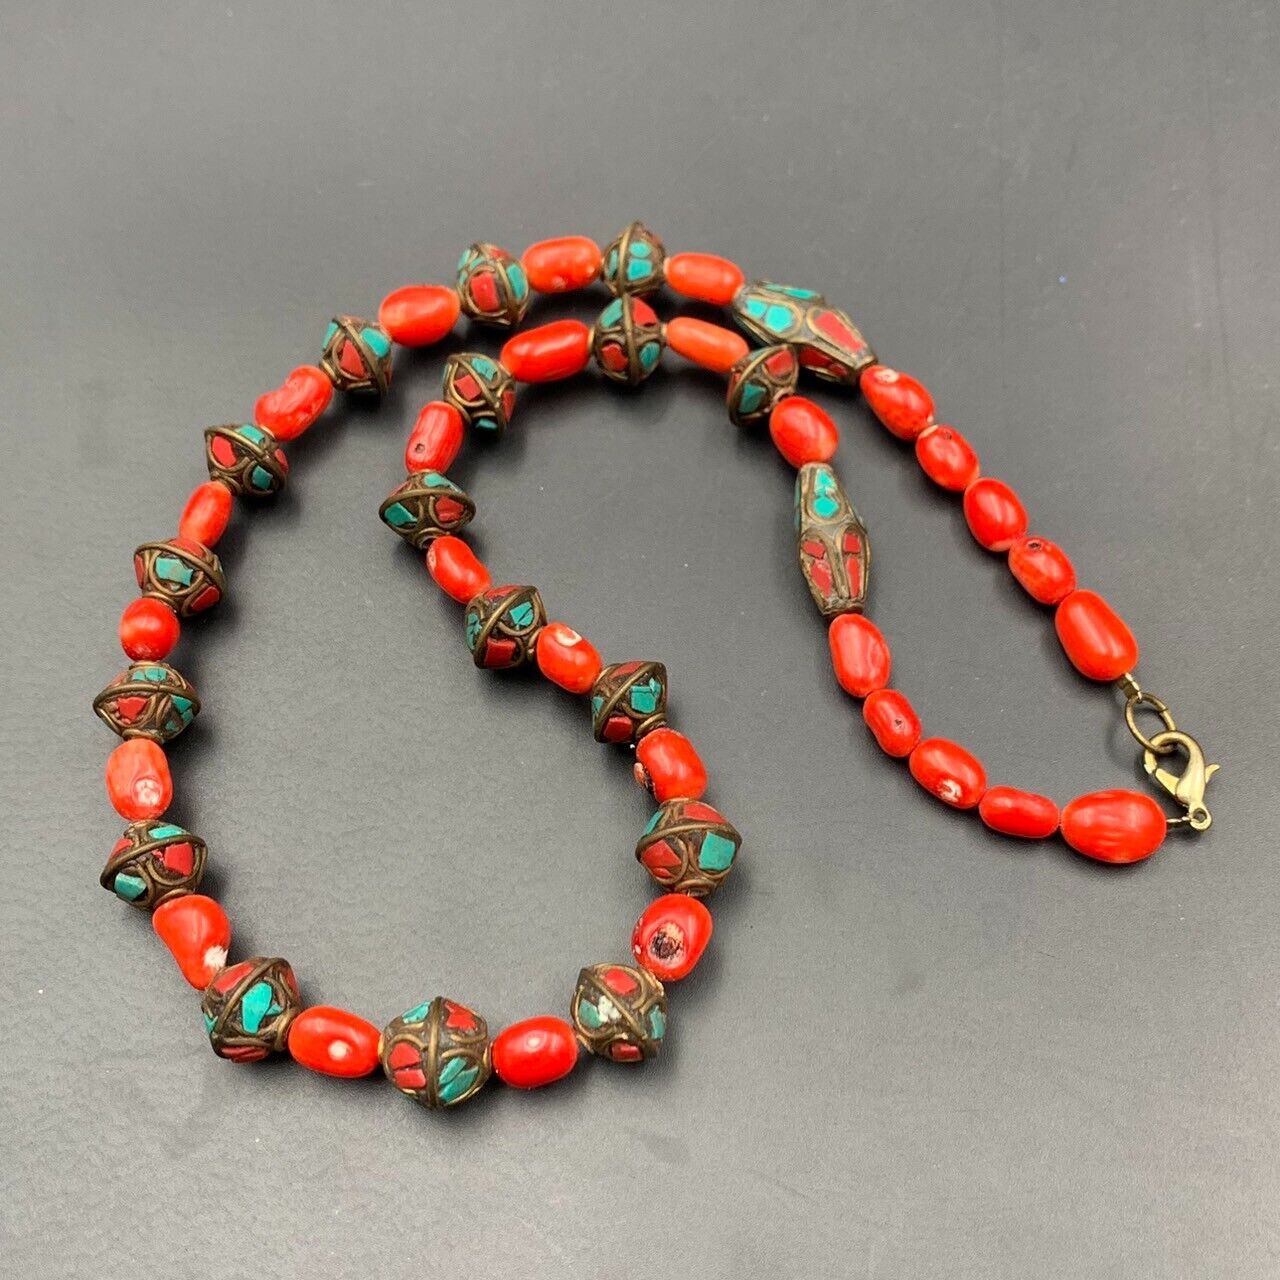 Awesome Natural Dyed Coral With Nepalese Handmade Vintage Beads Necklace. - Image 4 of 5